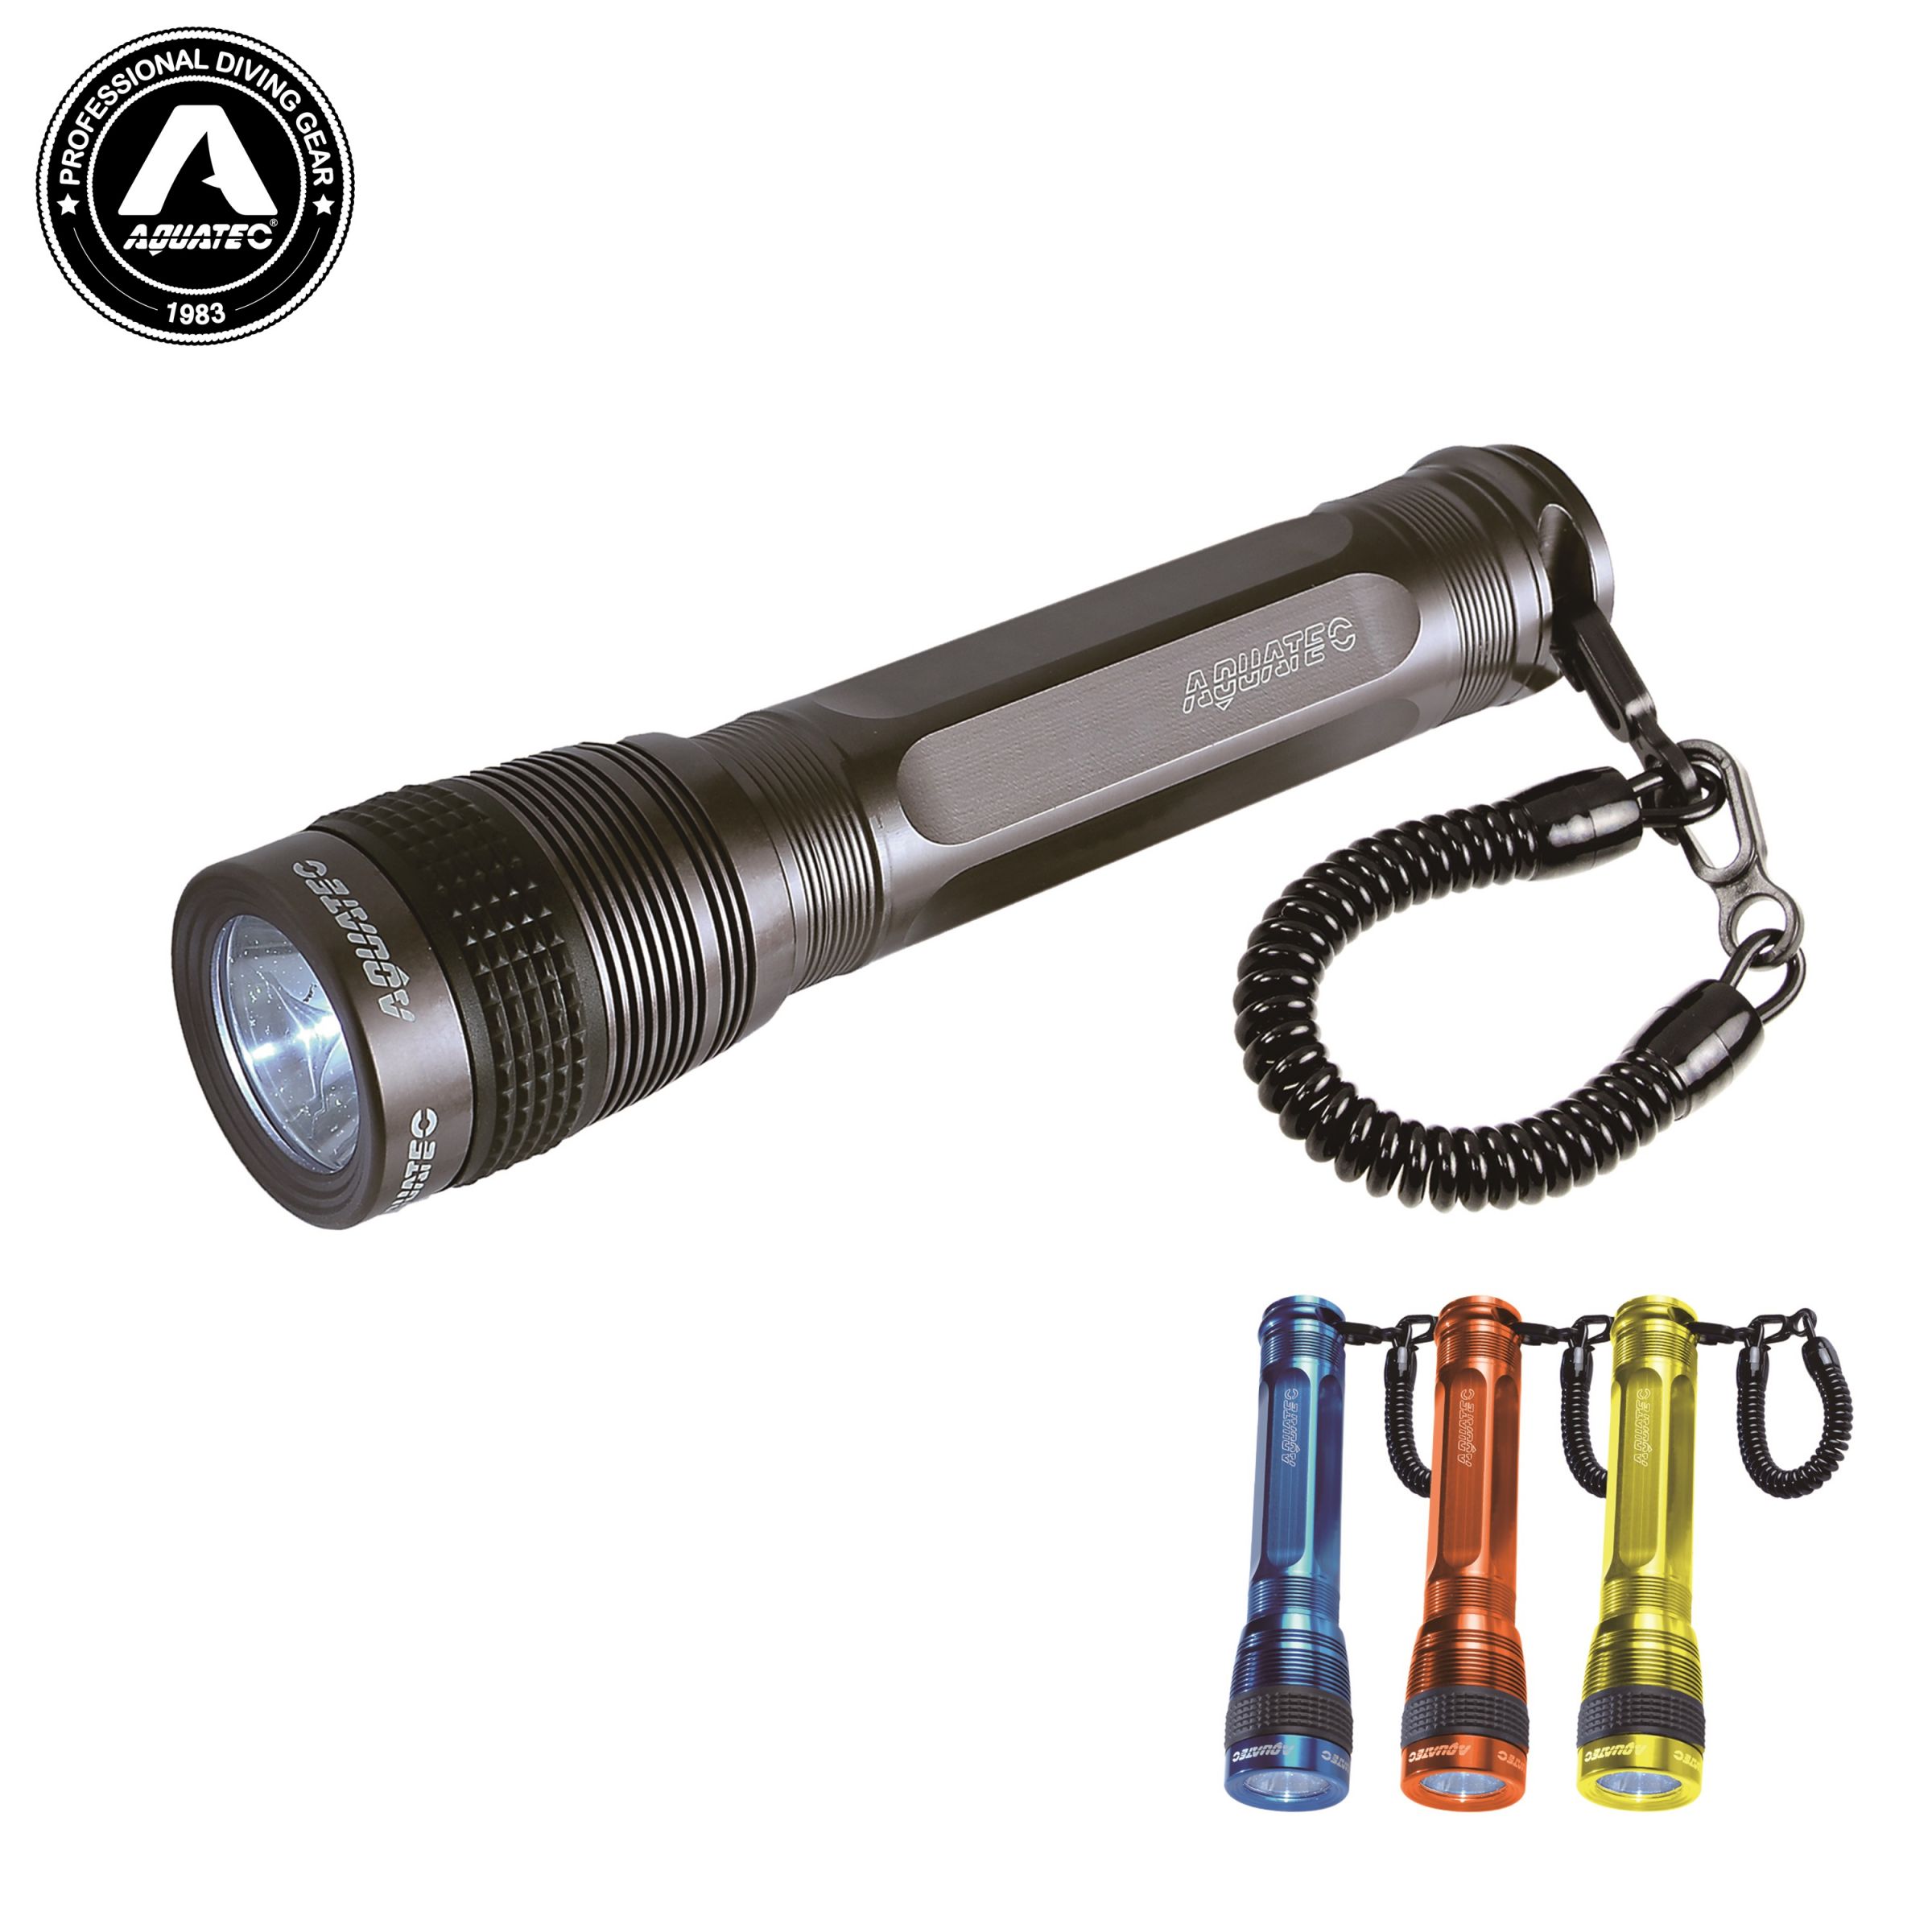 Haofy Diving Flashlight Scuba Dive Flashlight 8000 Lumen Underwater Submersible Torch Light with 3 Modes Scuba LED Flashlight 100M Photography Diving